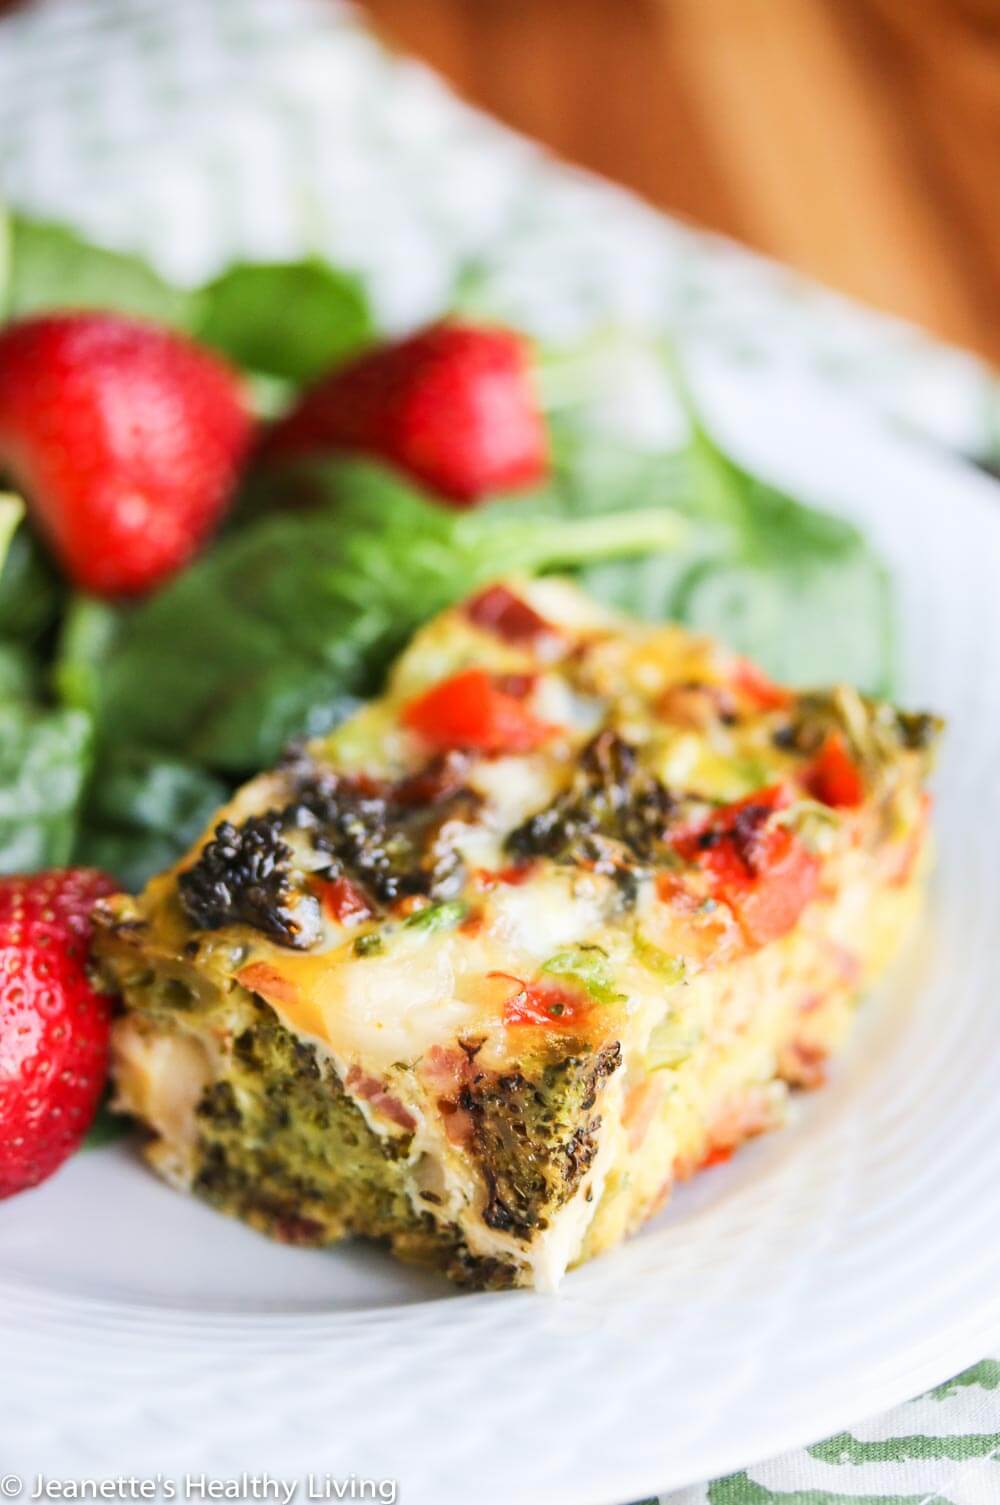 Roasted Broccoli Red Bell Pepper Pancetta Breakfast Casserole - great for a crowd at brunch!